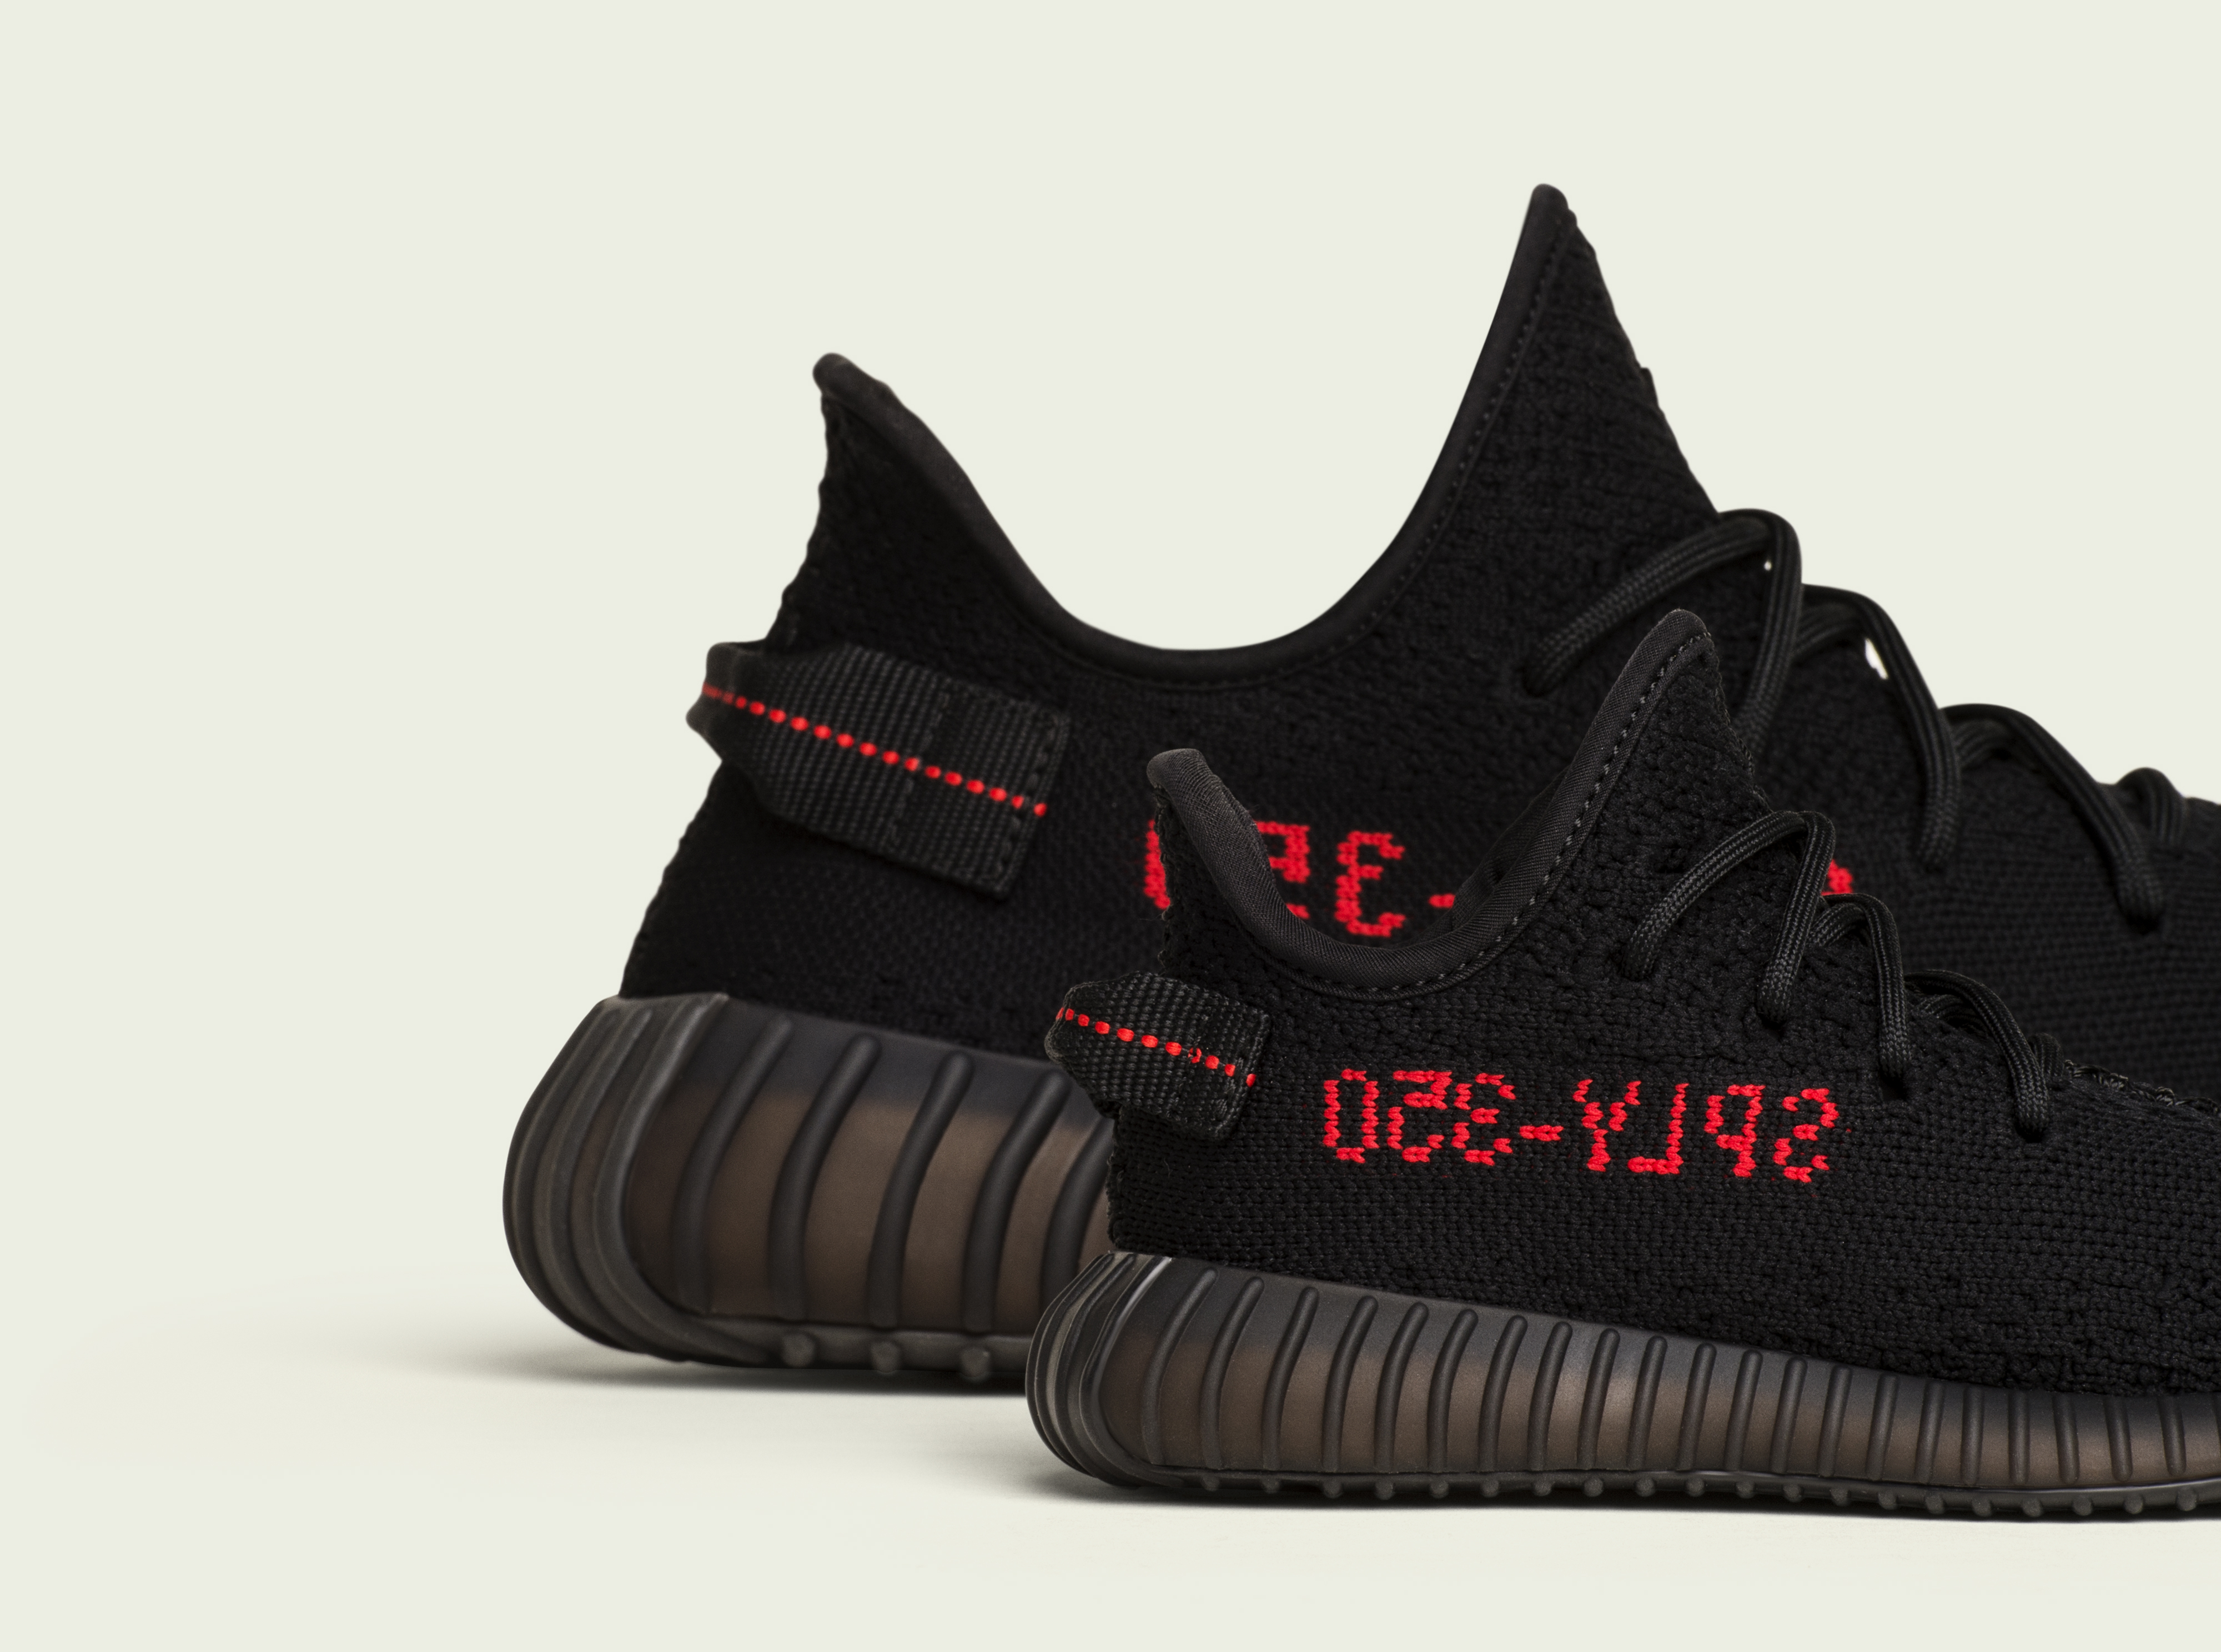 Adidas Yeezy Boost 350 V2 'Core Black/Red